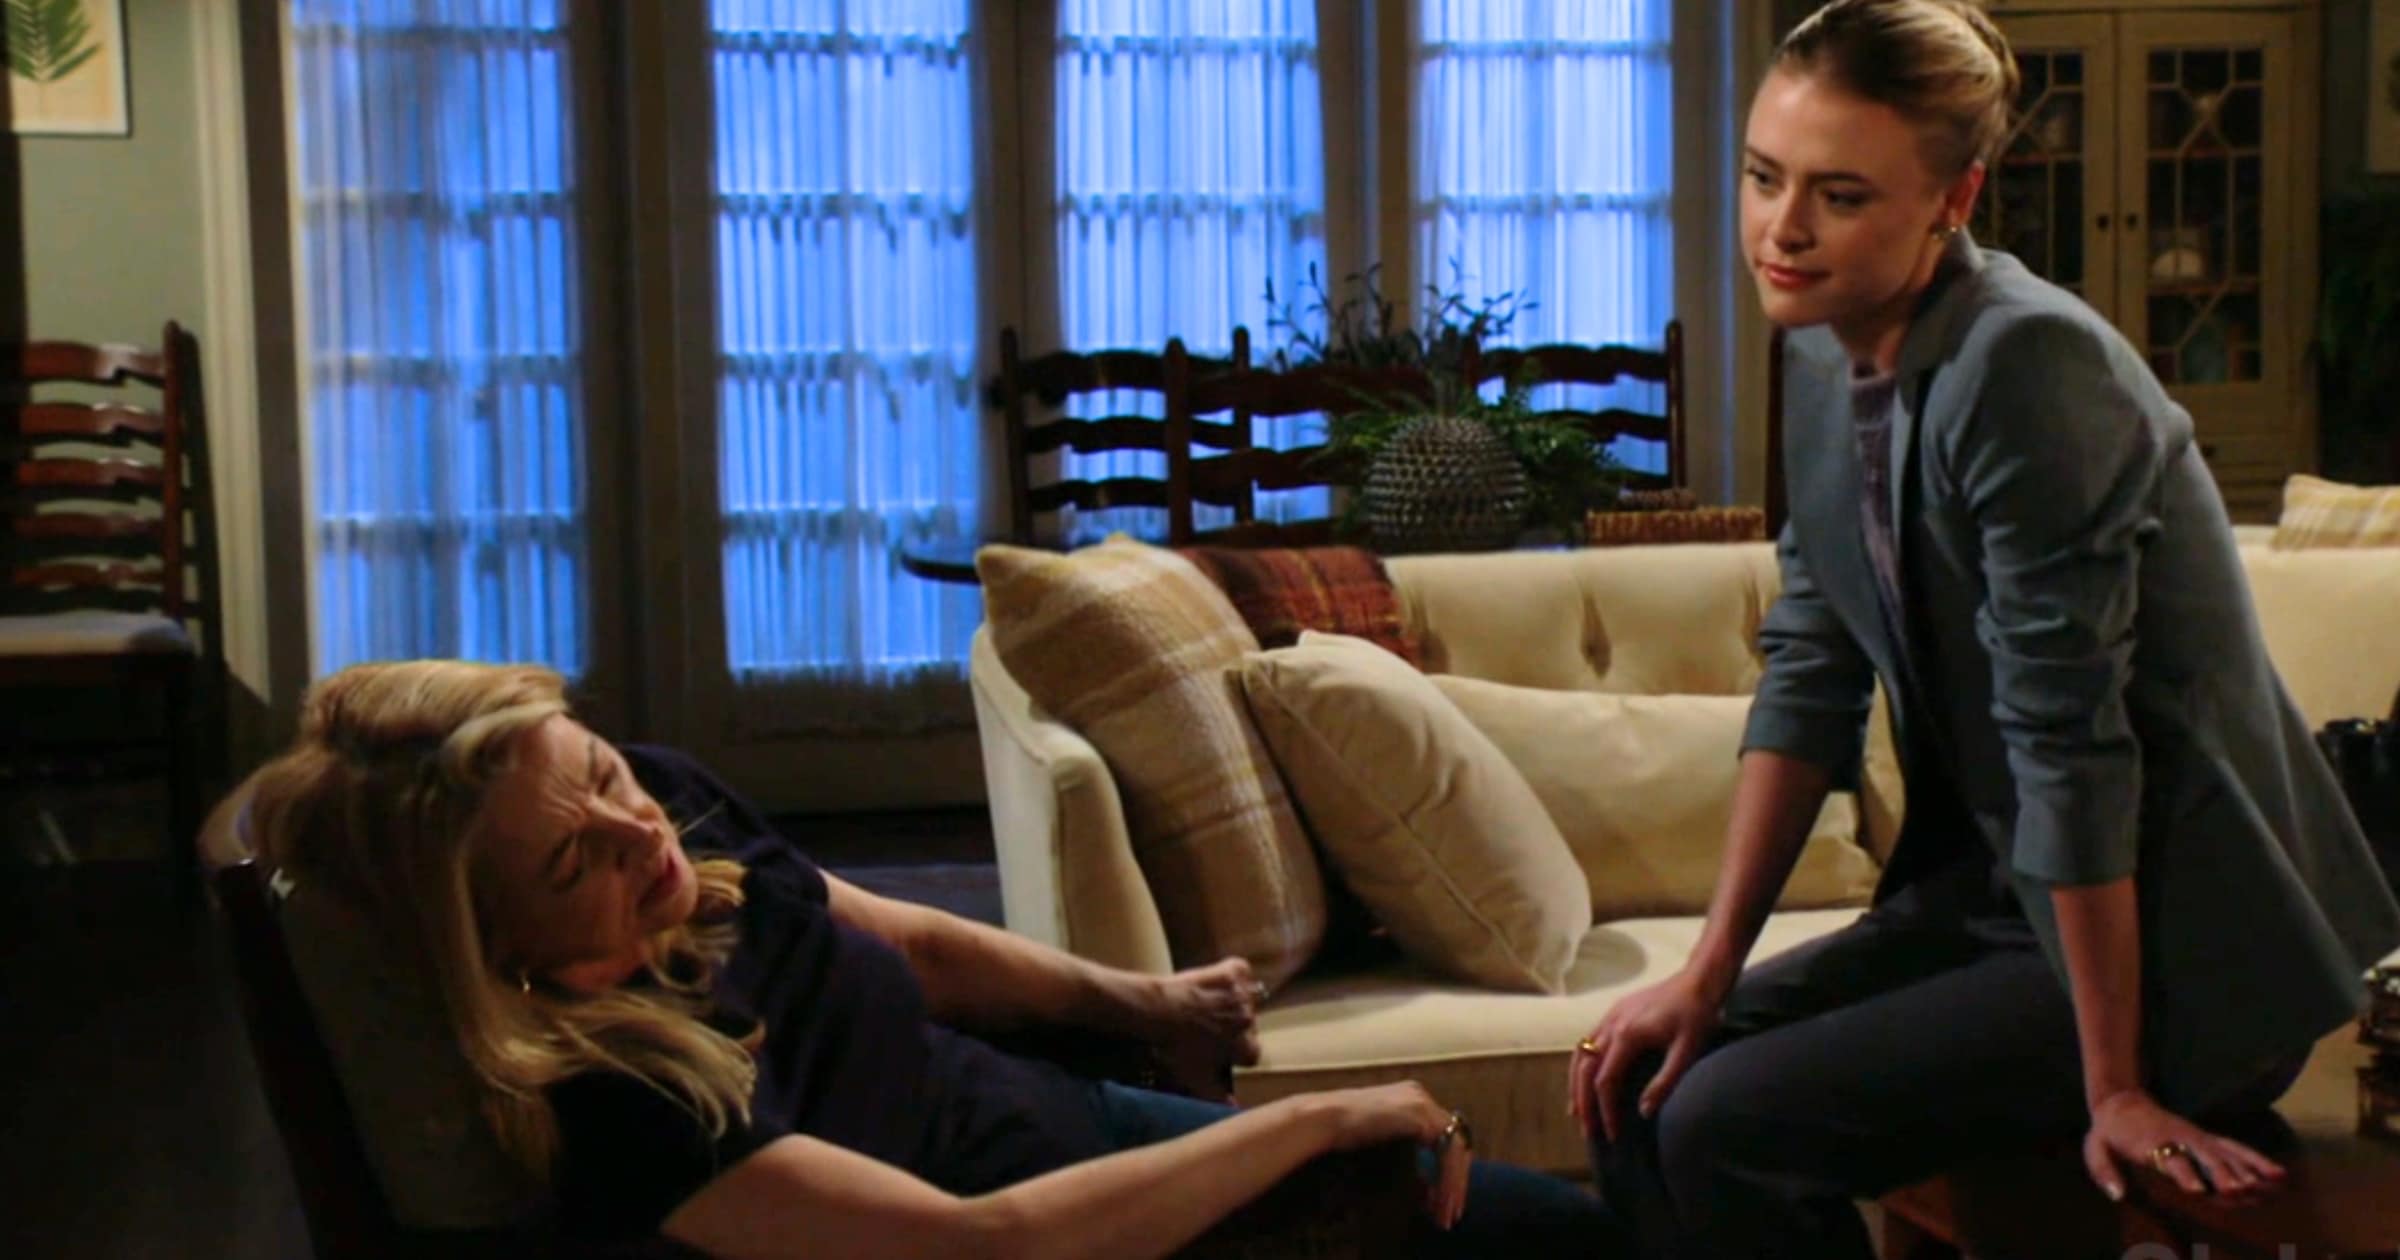 The Young and the Restless - Nov 16 - Nikki and Claire